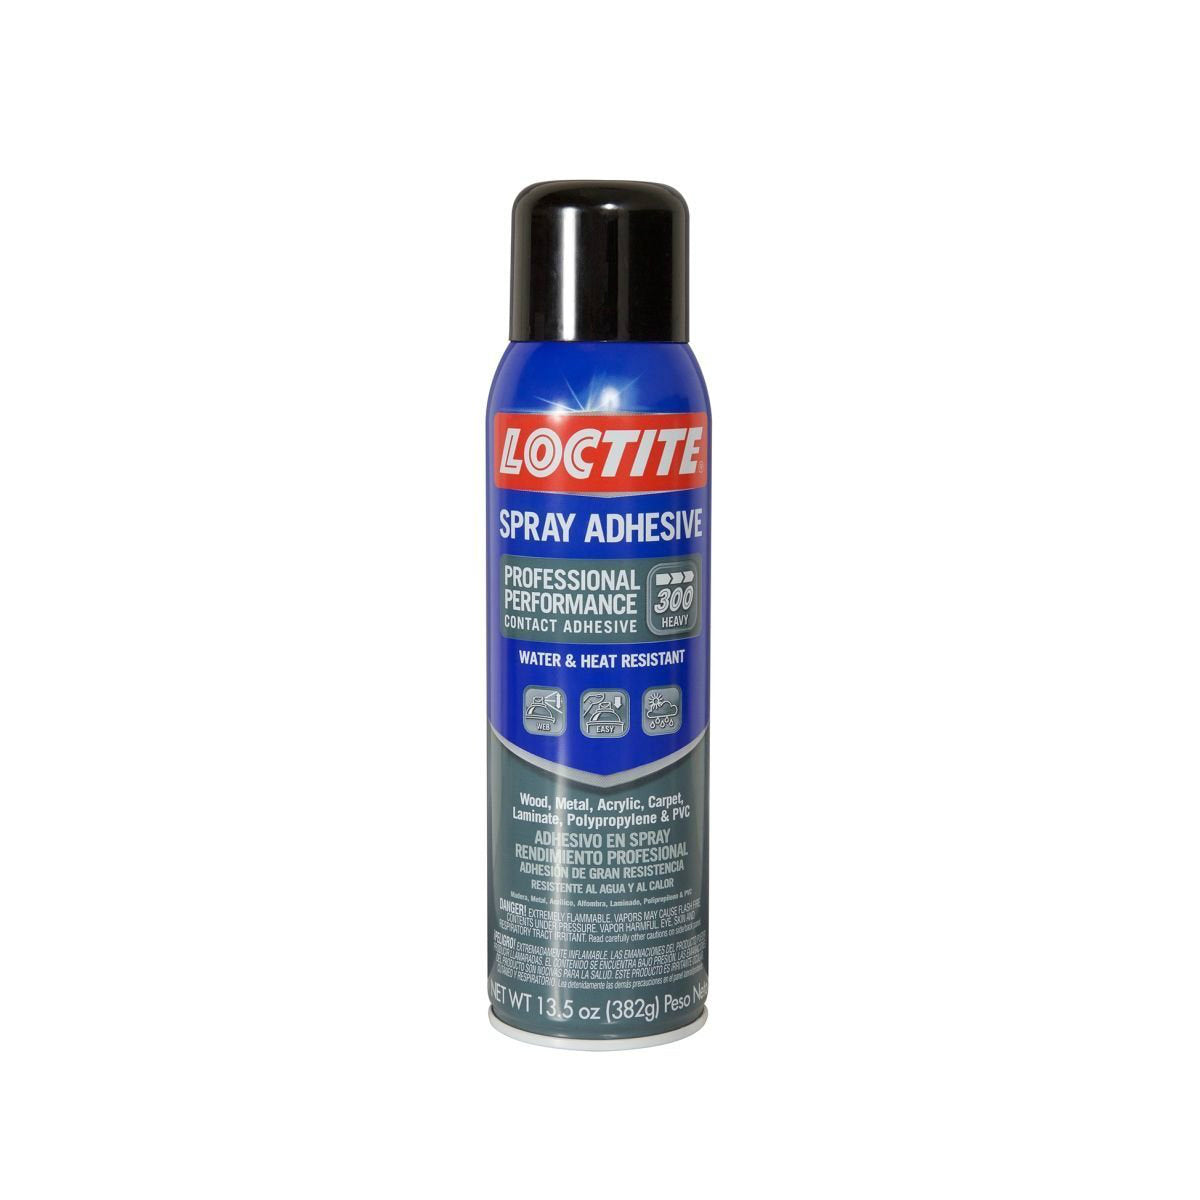 Loctite 2267077 Professional Performance Spray Adhesive, Clear, 13.5 Oz